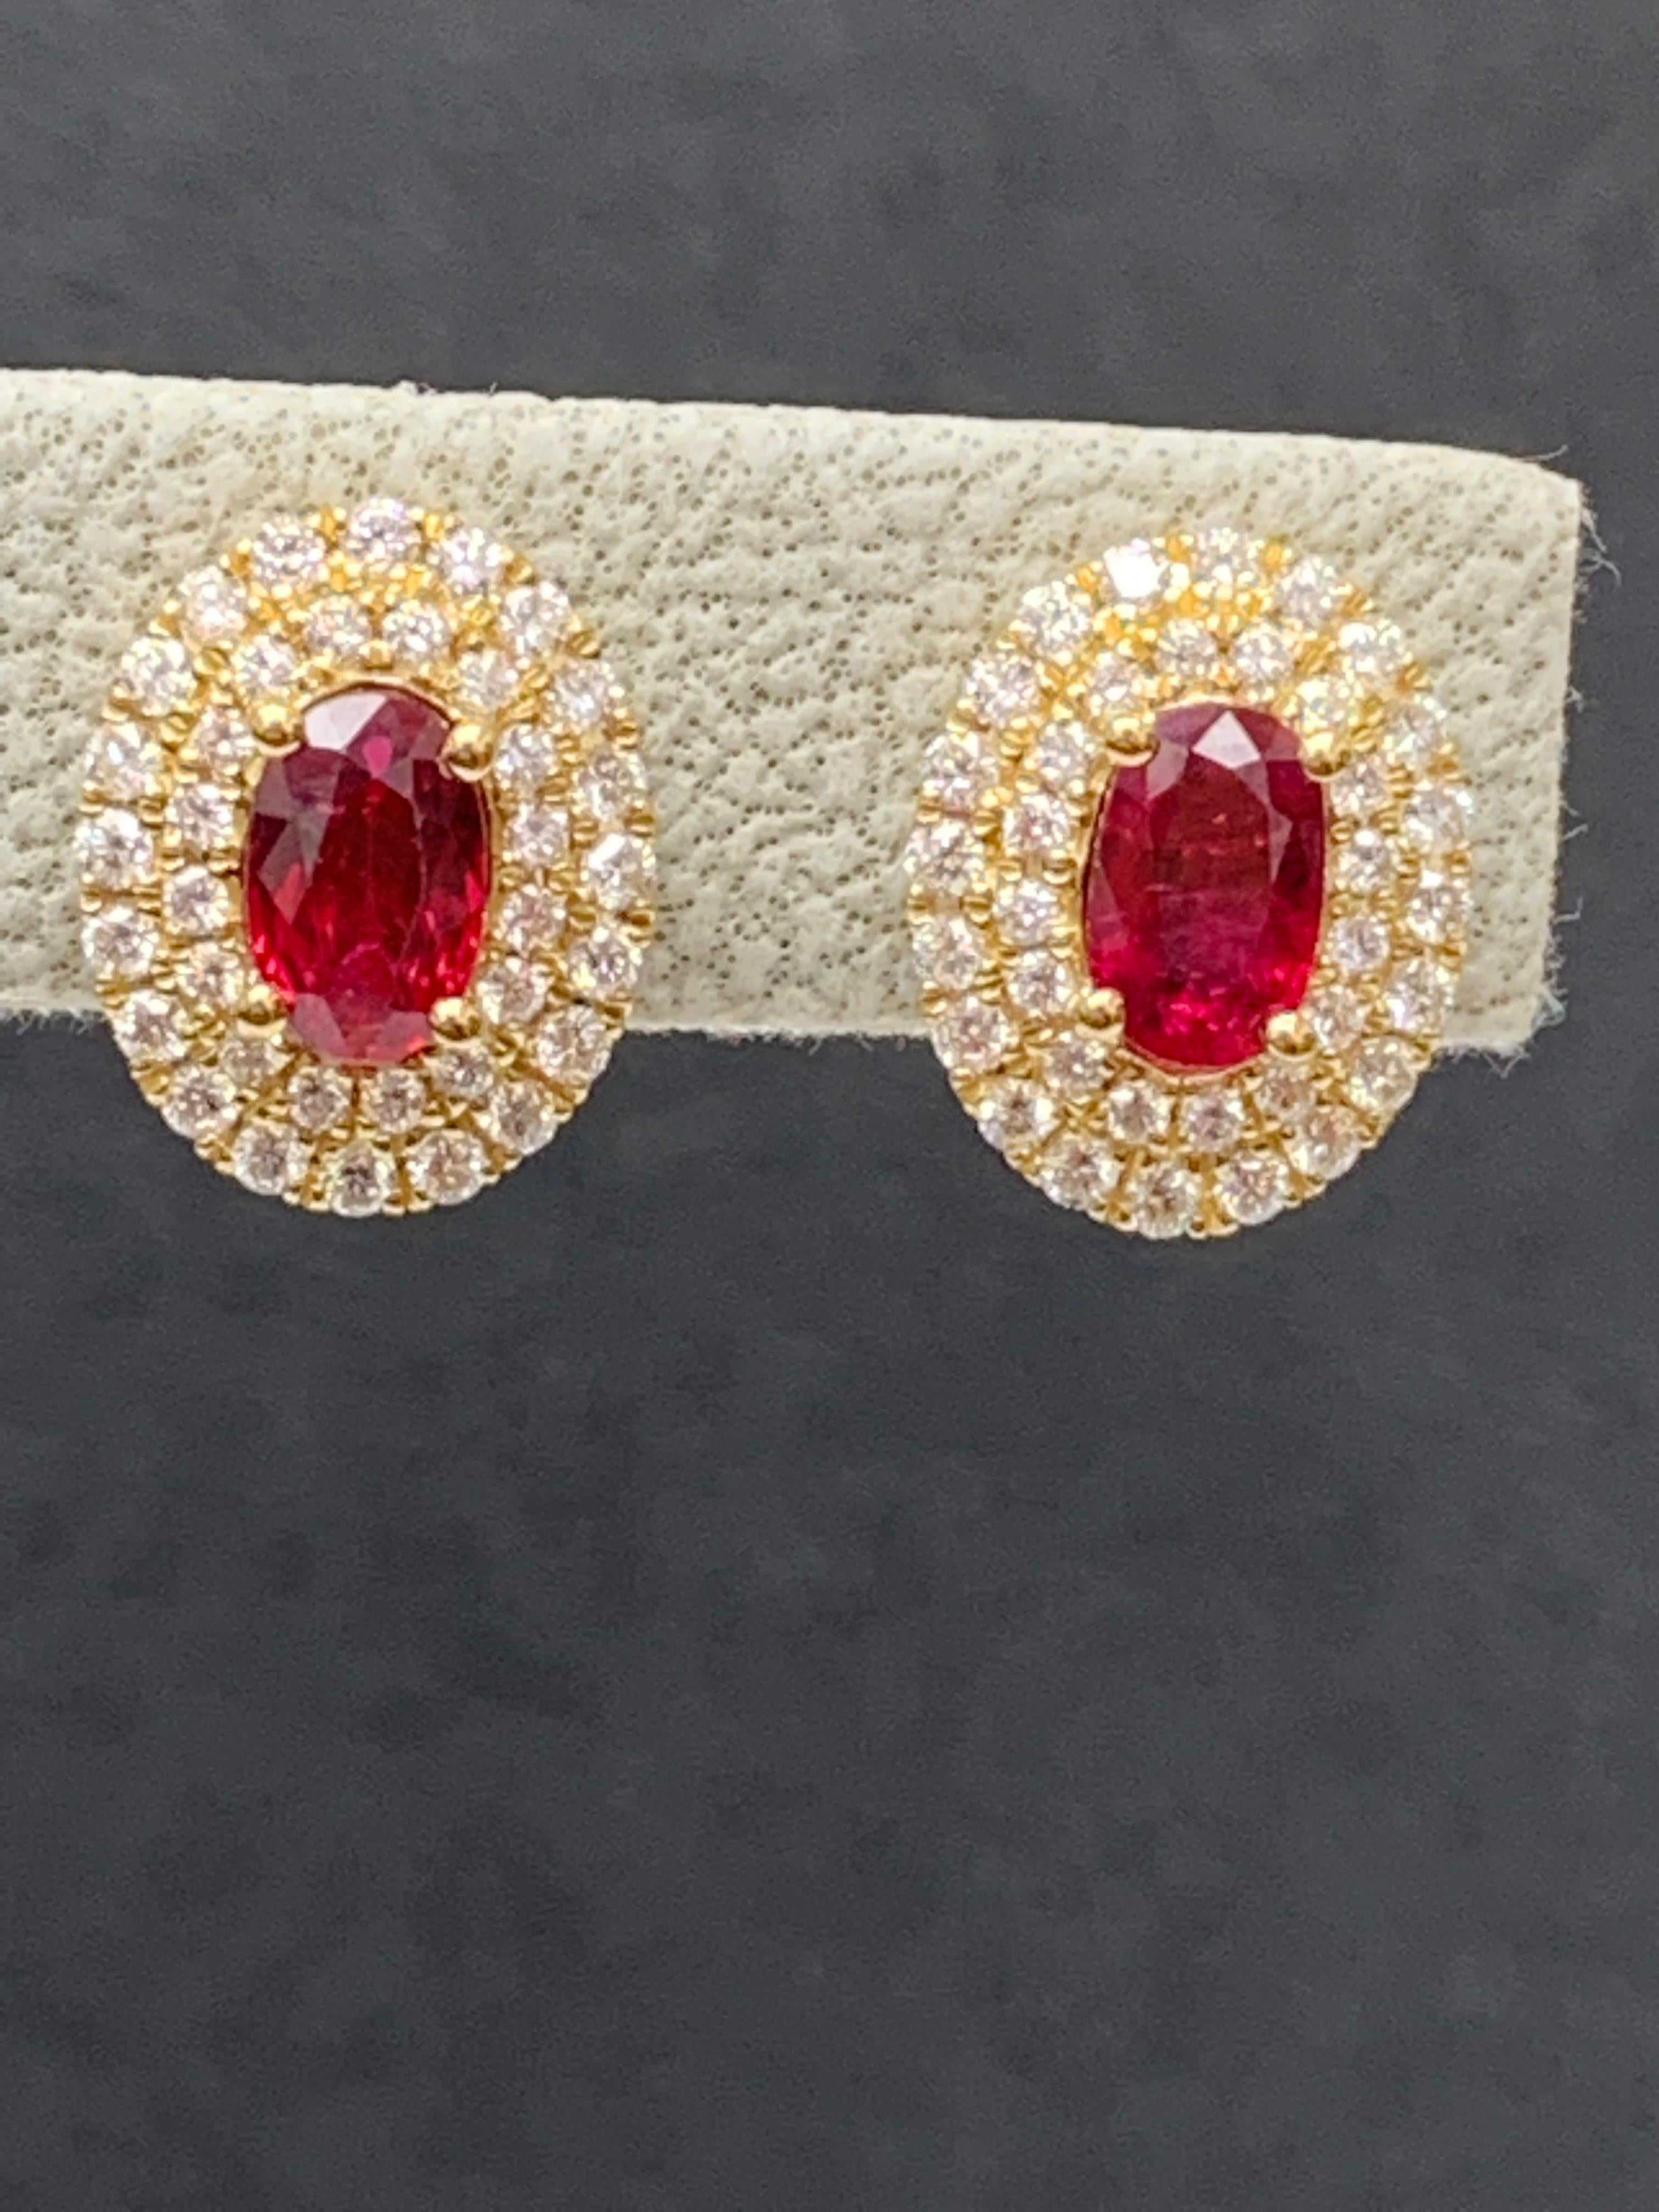 0.98 Carat Oval Cut Ruby and Diamond Stud Earrings in 18K Yellow Gold For Sale 5